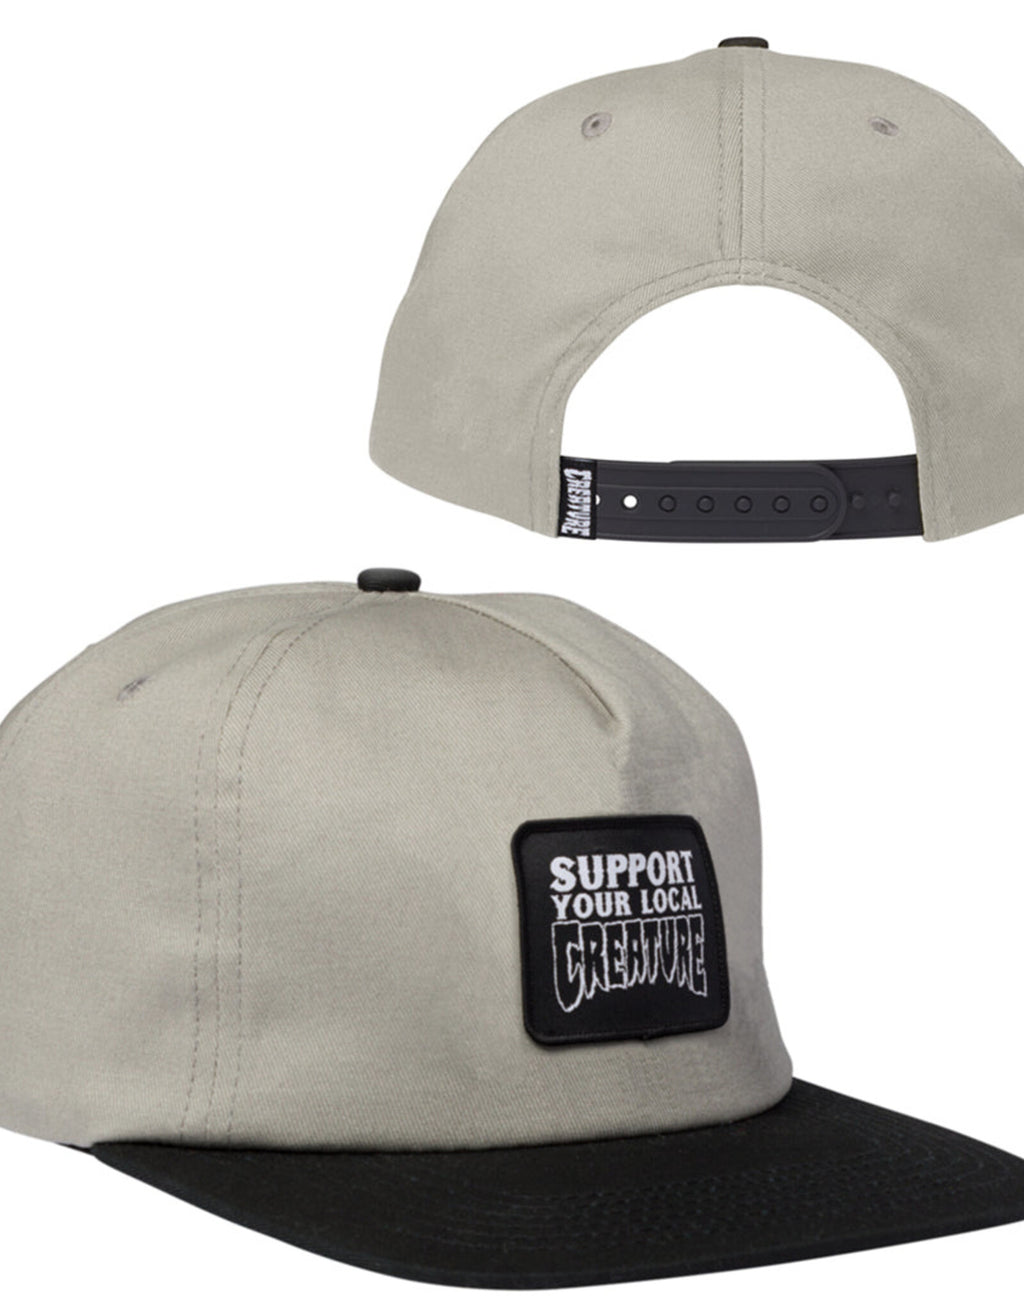 SALE - CREATURE - SUPPORT PATCH SNAP - GREY/BLACK